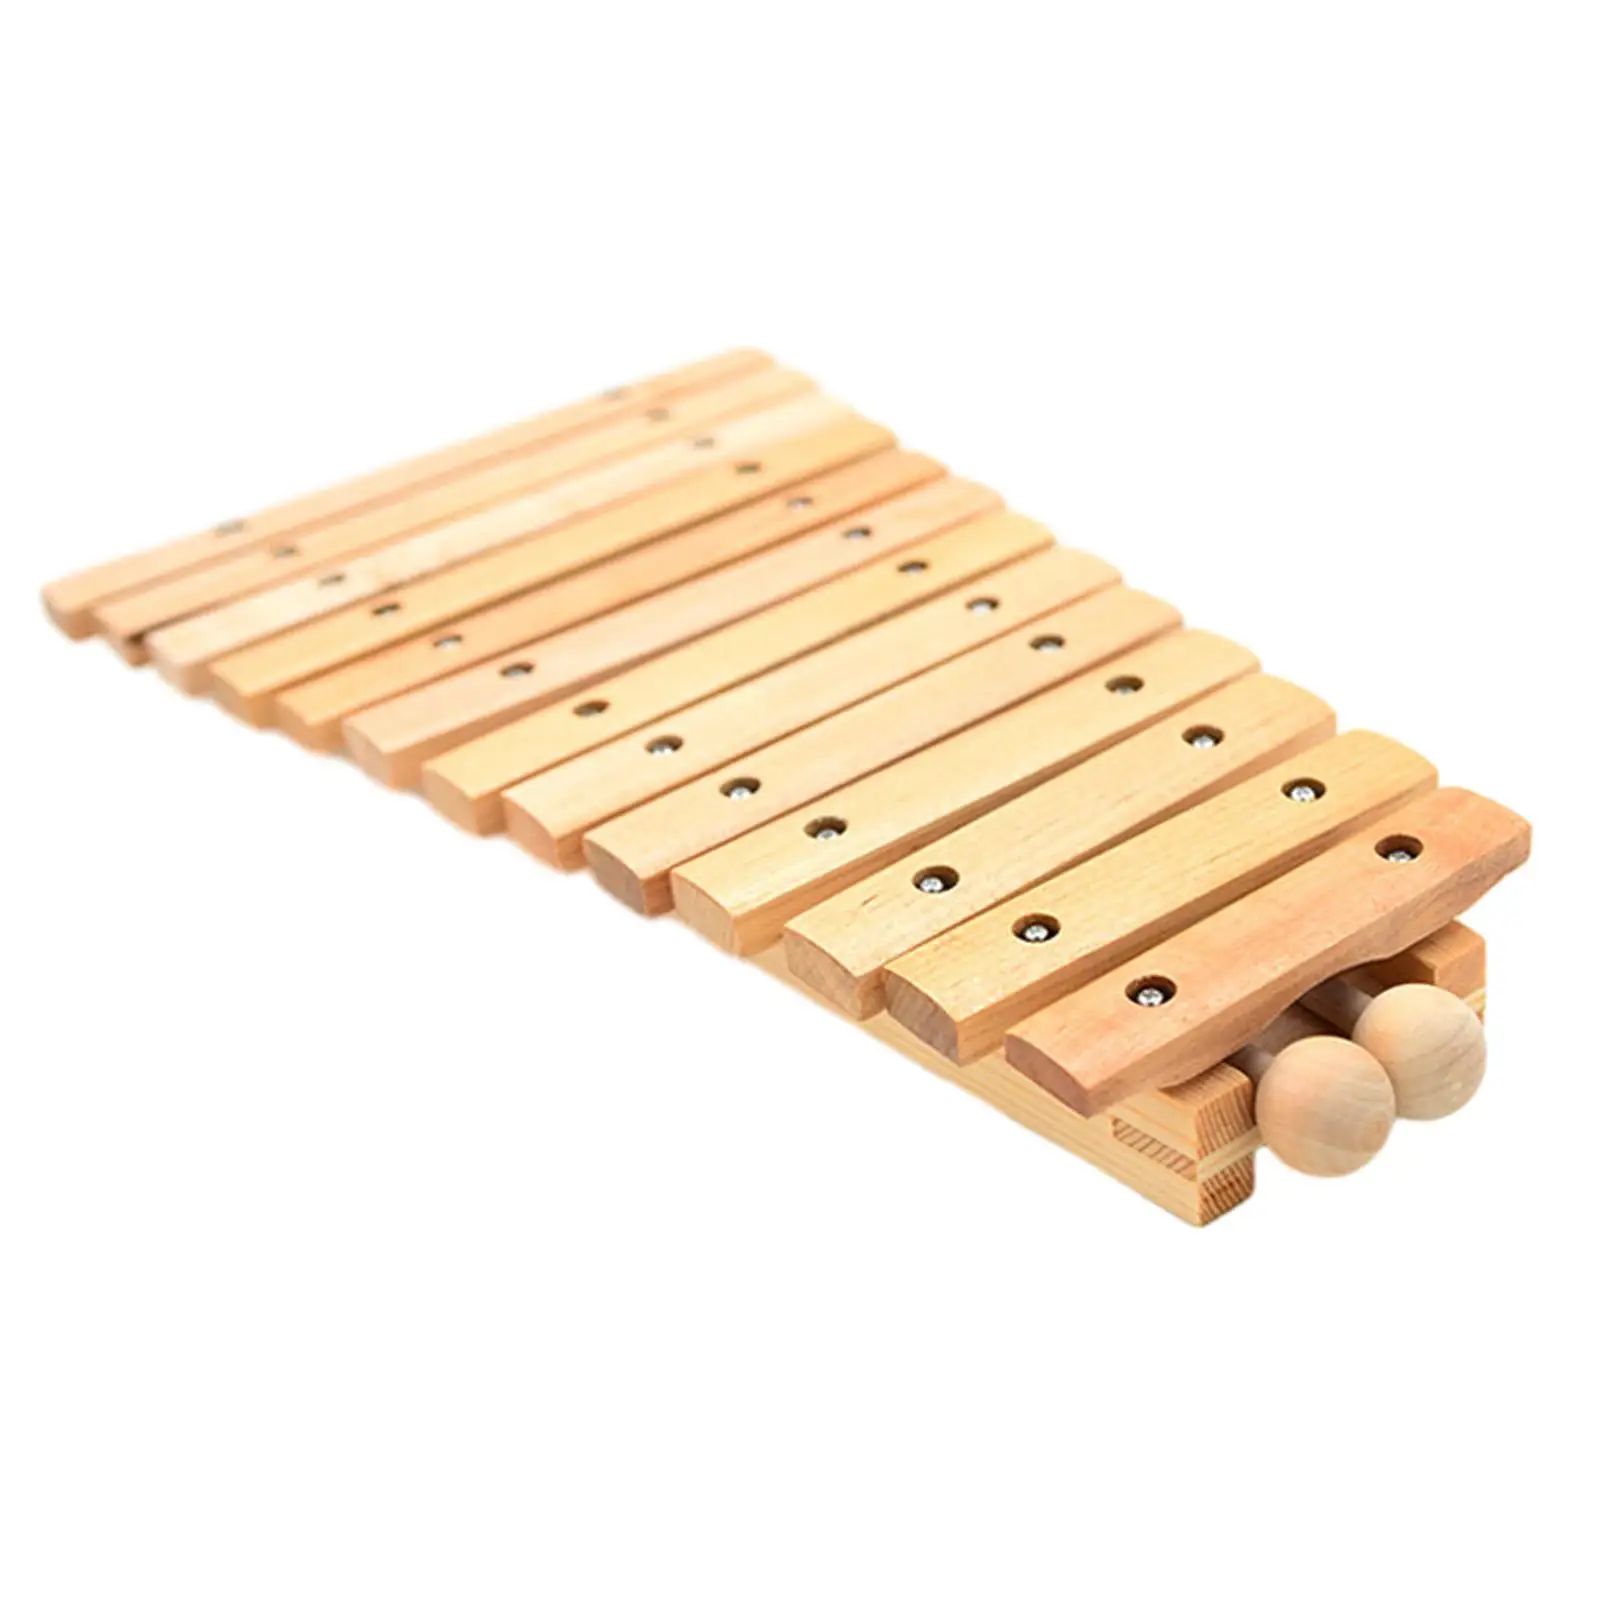 13 Note Wood Xylophone Wooden Percussion Toys Hand Knock Piano Toy for Home Family Sessions Live Performance Concert Outside